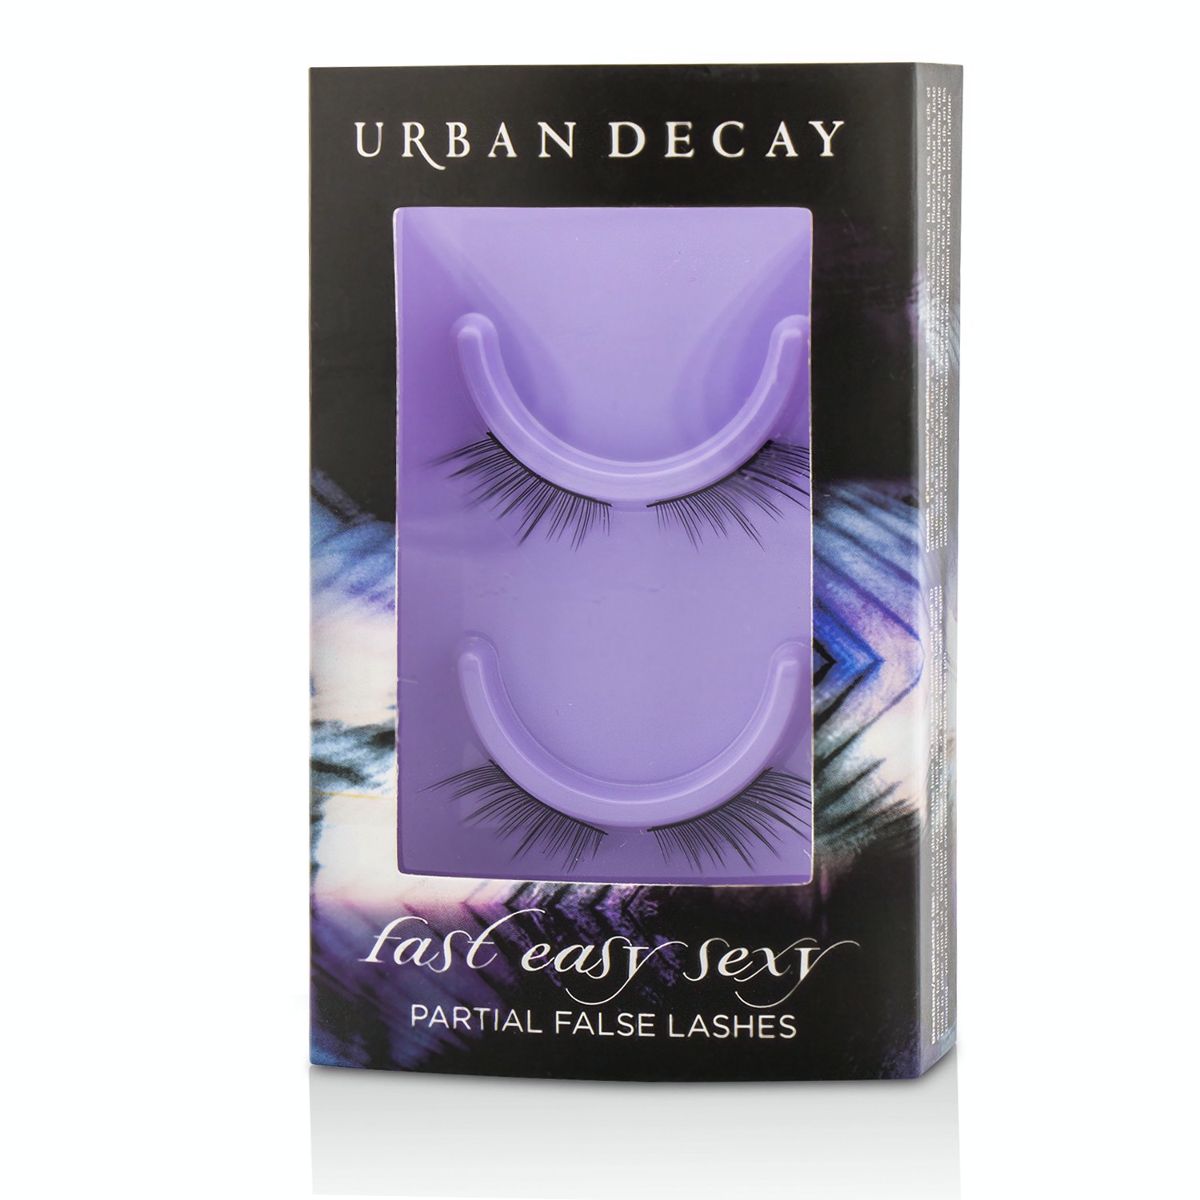 Fast Easy Sexy Partial False Lashes - Instalure Urban Decay Image